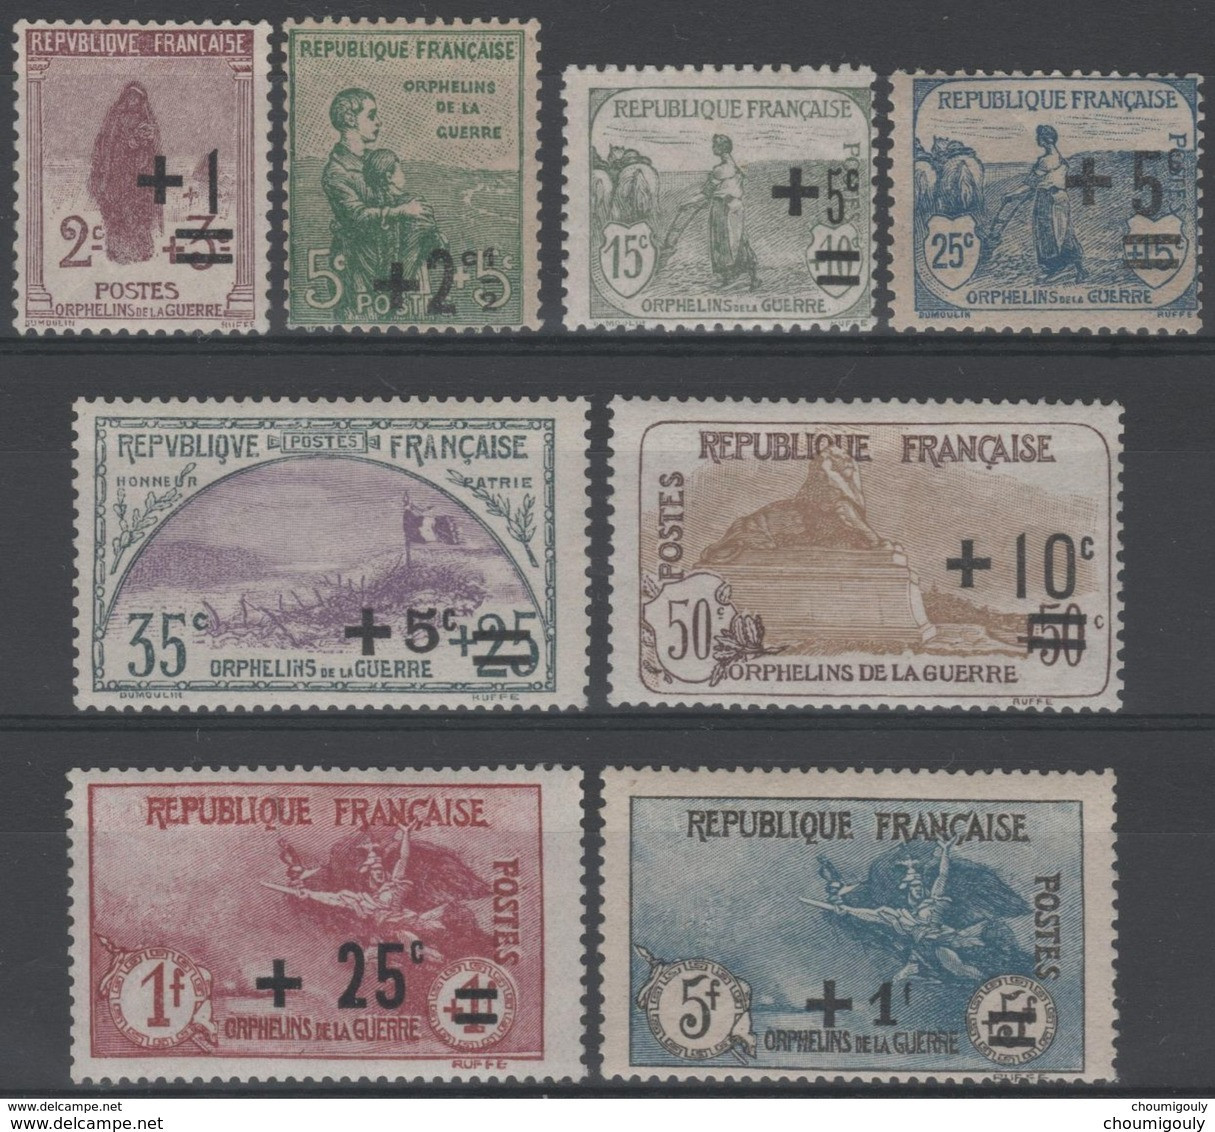 FRANCE STAMP TIMBRE YVERT 162/69 ANNEE COMPLETE 1922 NEUVE Xx LUXE, VALEUR: 530€ - ....-1939